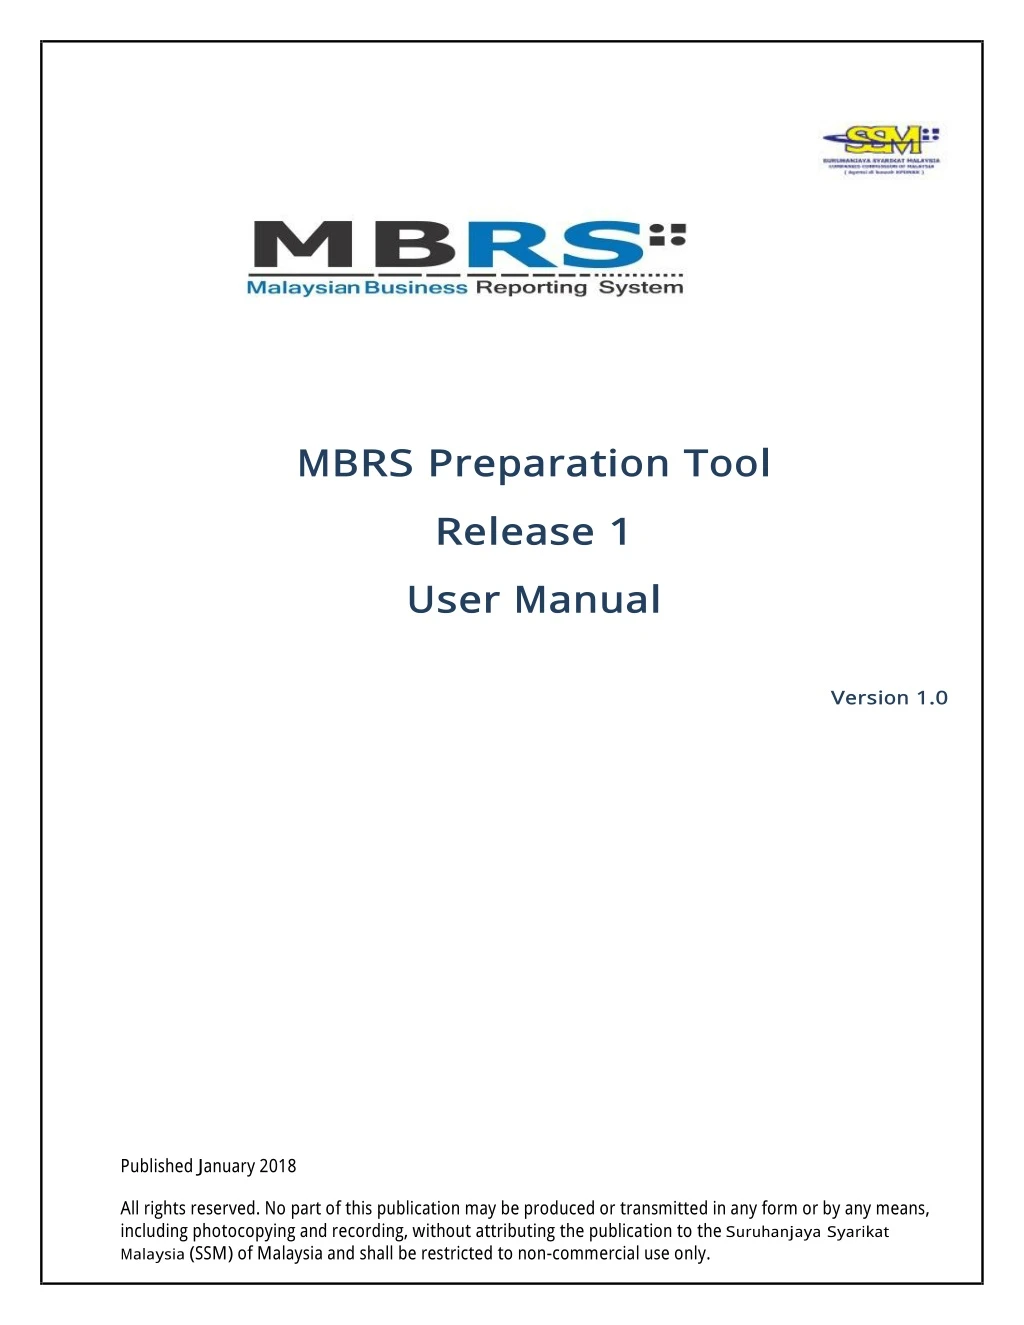 mbrs preparation tool